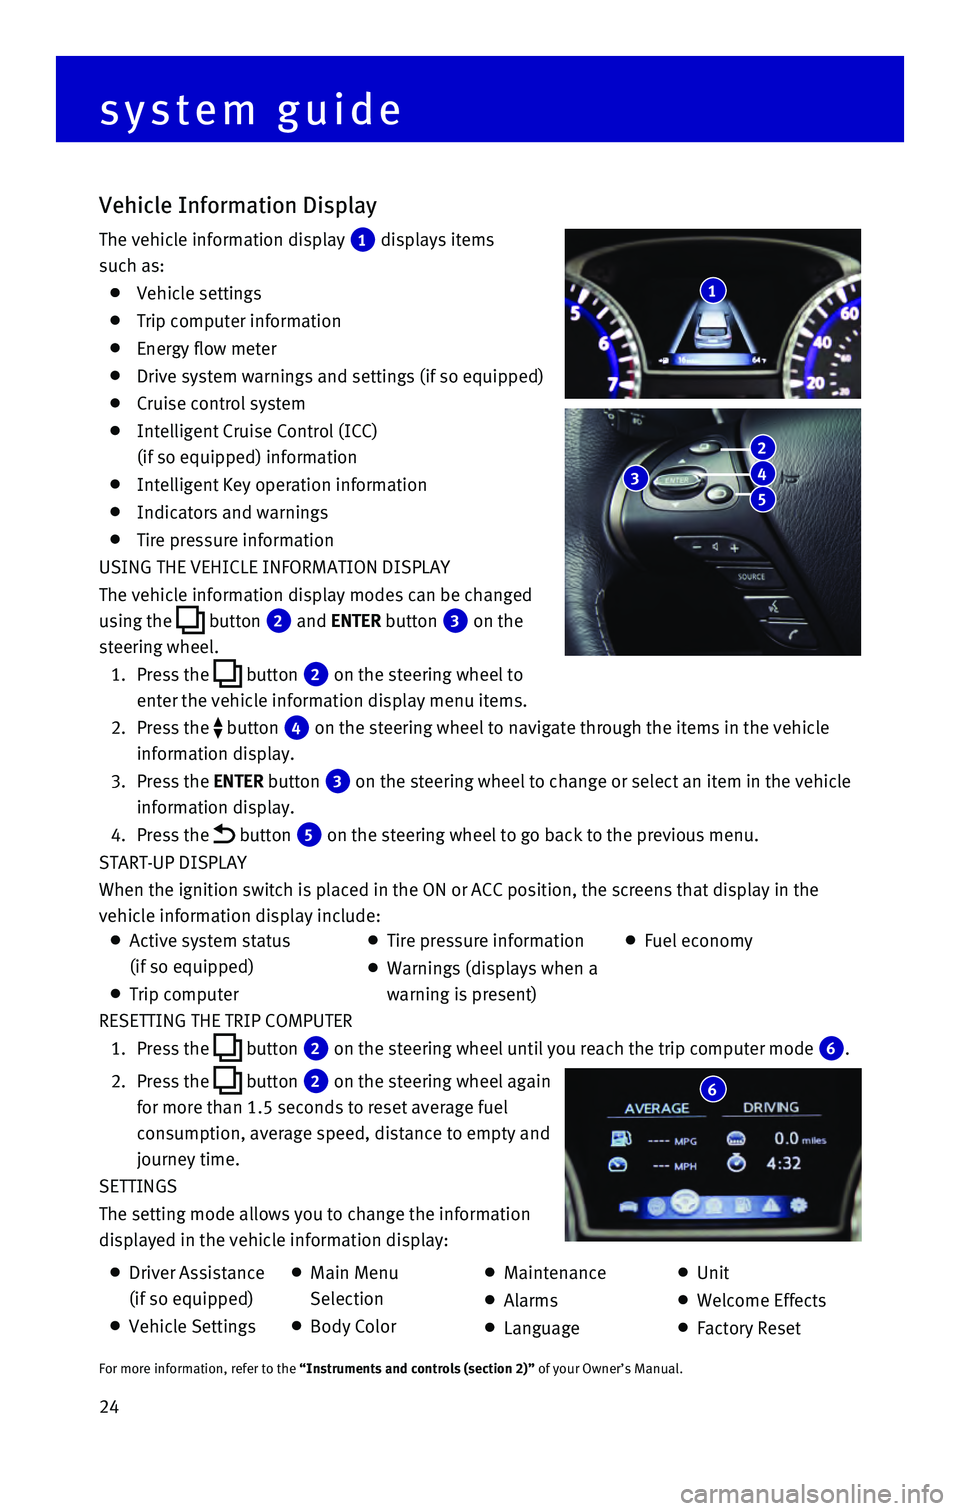 INFINITI QX60 HYBRID 2016  Quick Reference Guide 24 RESETTING THE TRIP COMPUTER
 1.   Press  the  button 2 on the steering wheel until you reach the trip computer mode 6.
 2.    Press the  button 2 on the steering wheel again 
for more than 1.5 seco